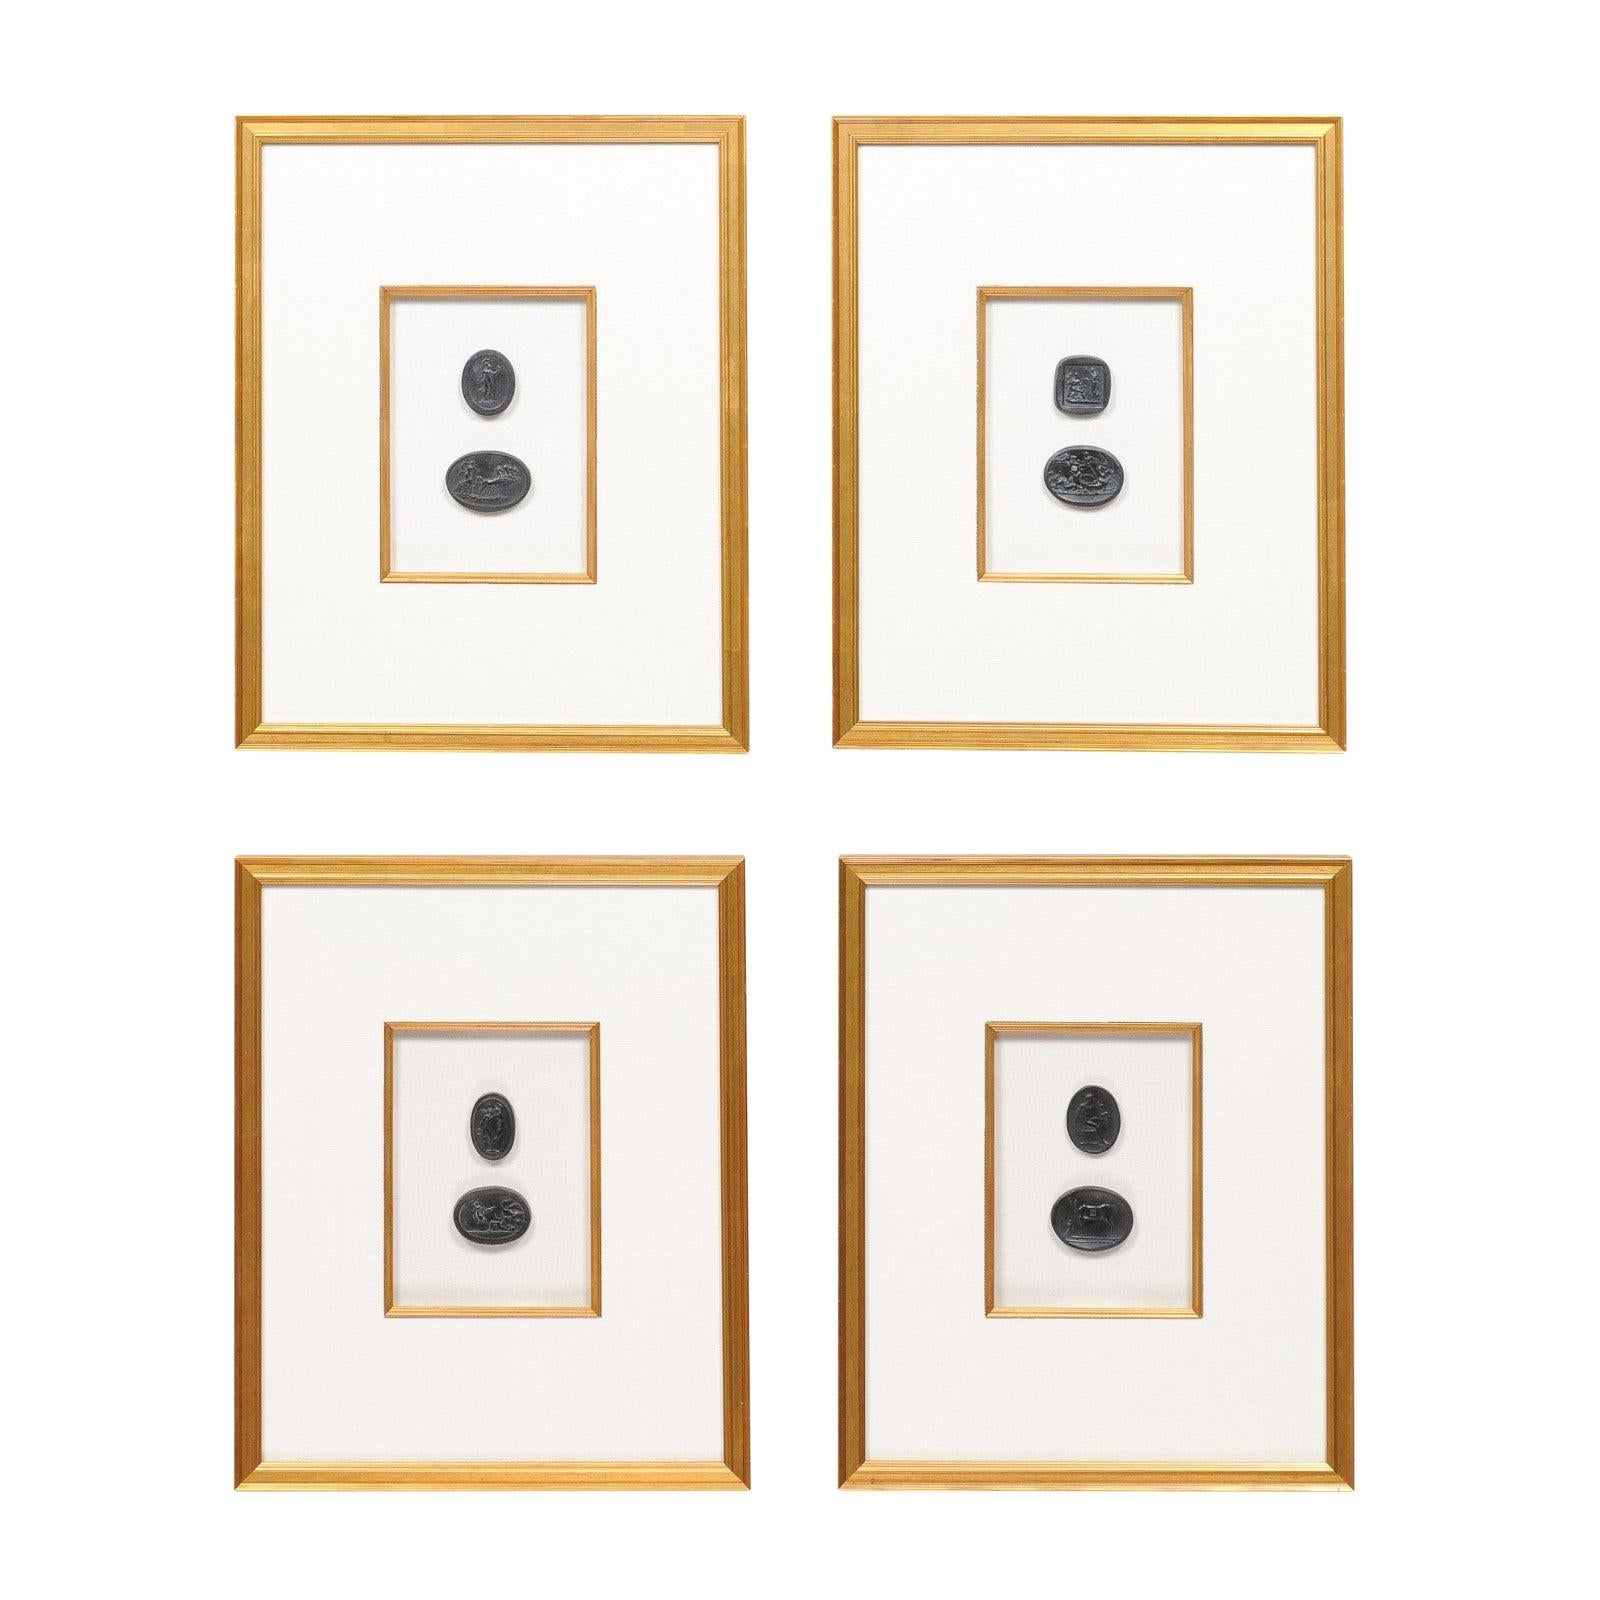 Collection of Black Intaglio Seals, Displayed Within Custom Golden Wood Frames